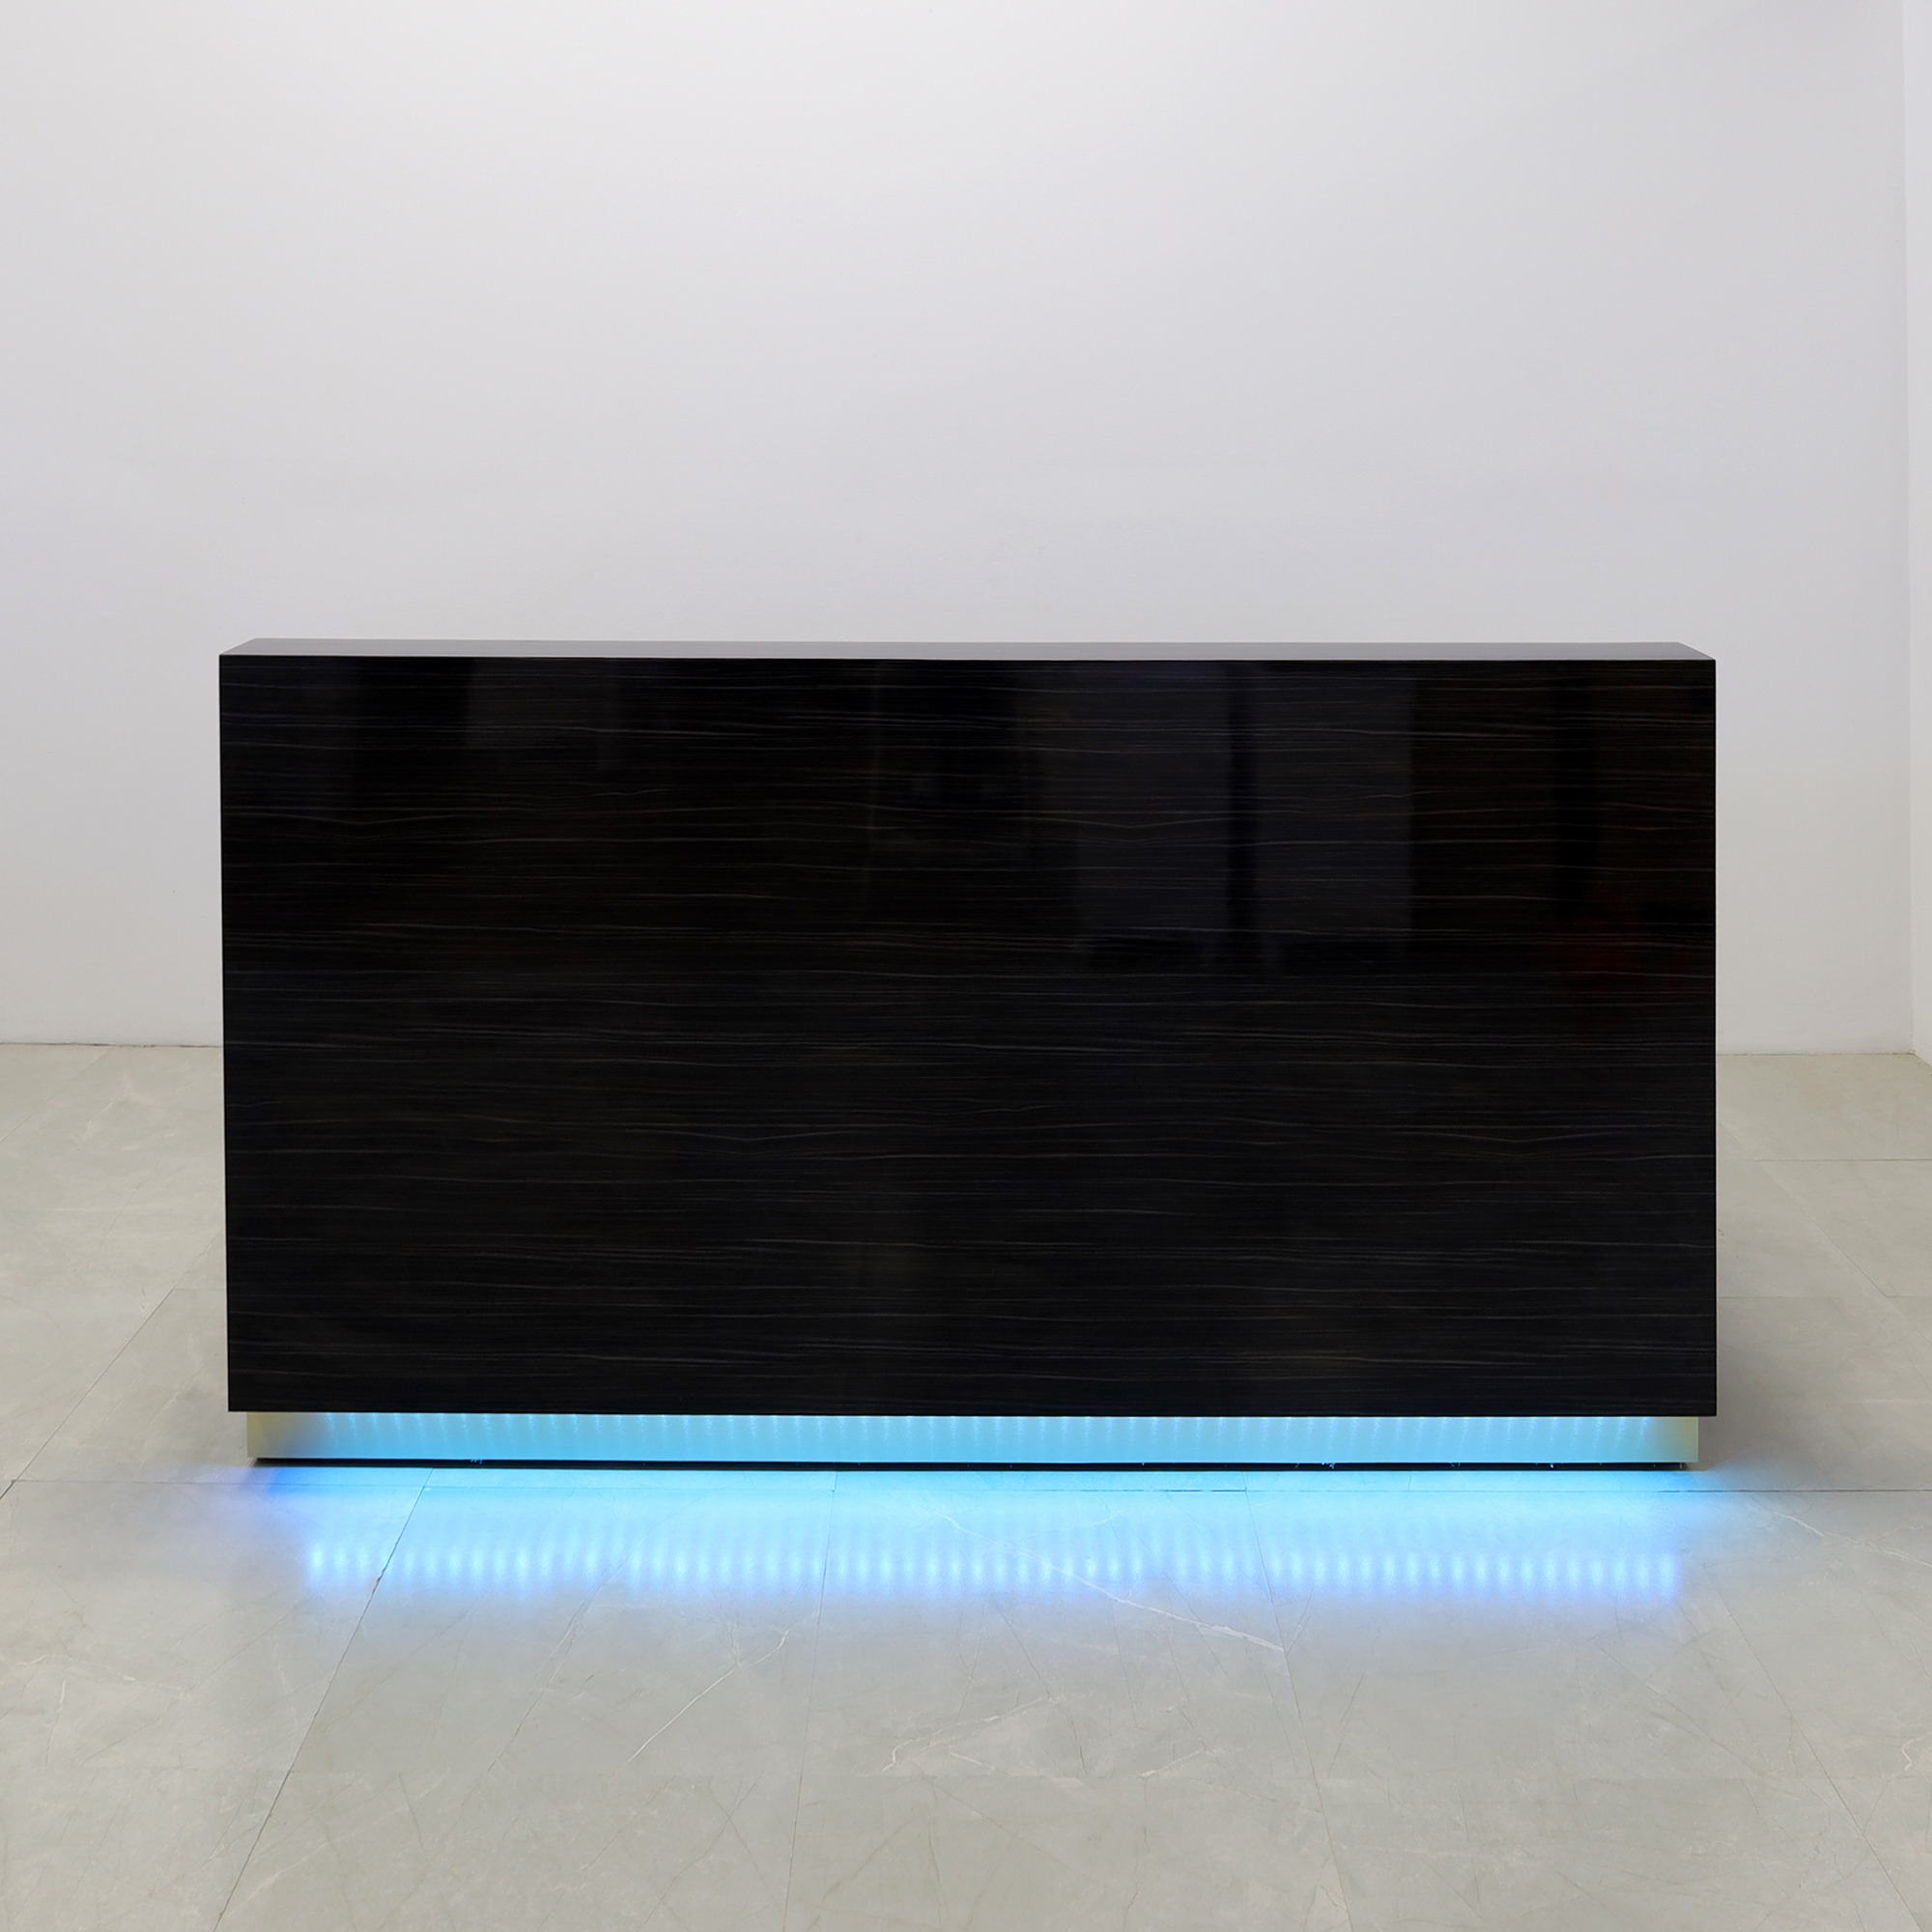 84-inch Dallas Straight Custom Reception Desk in special madagascar gloss laminate main desk and bruhed aluminum toe-kick, with color LED, shown here.